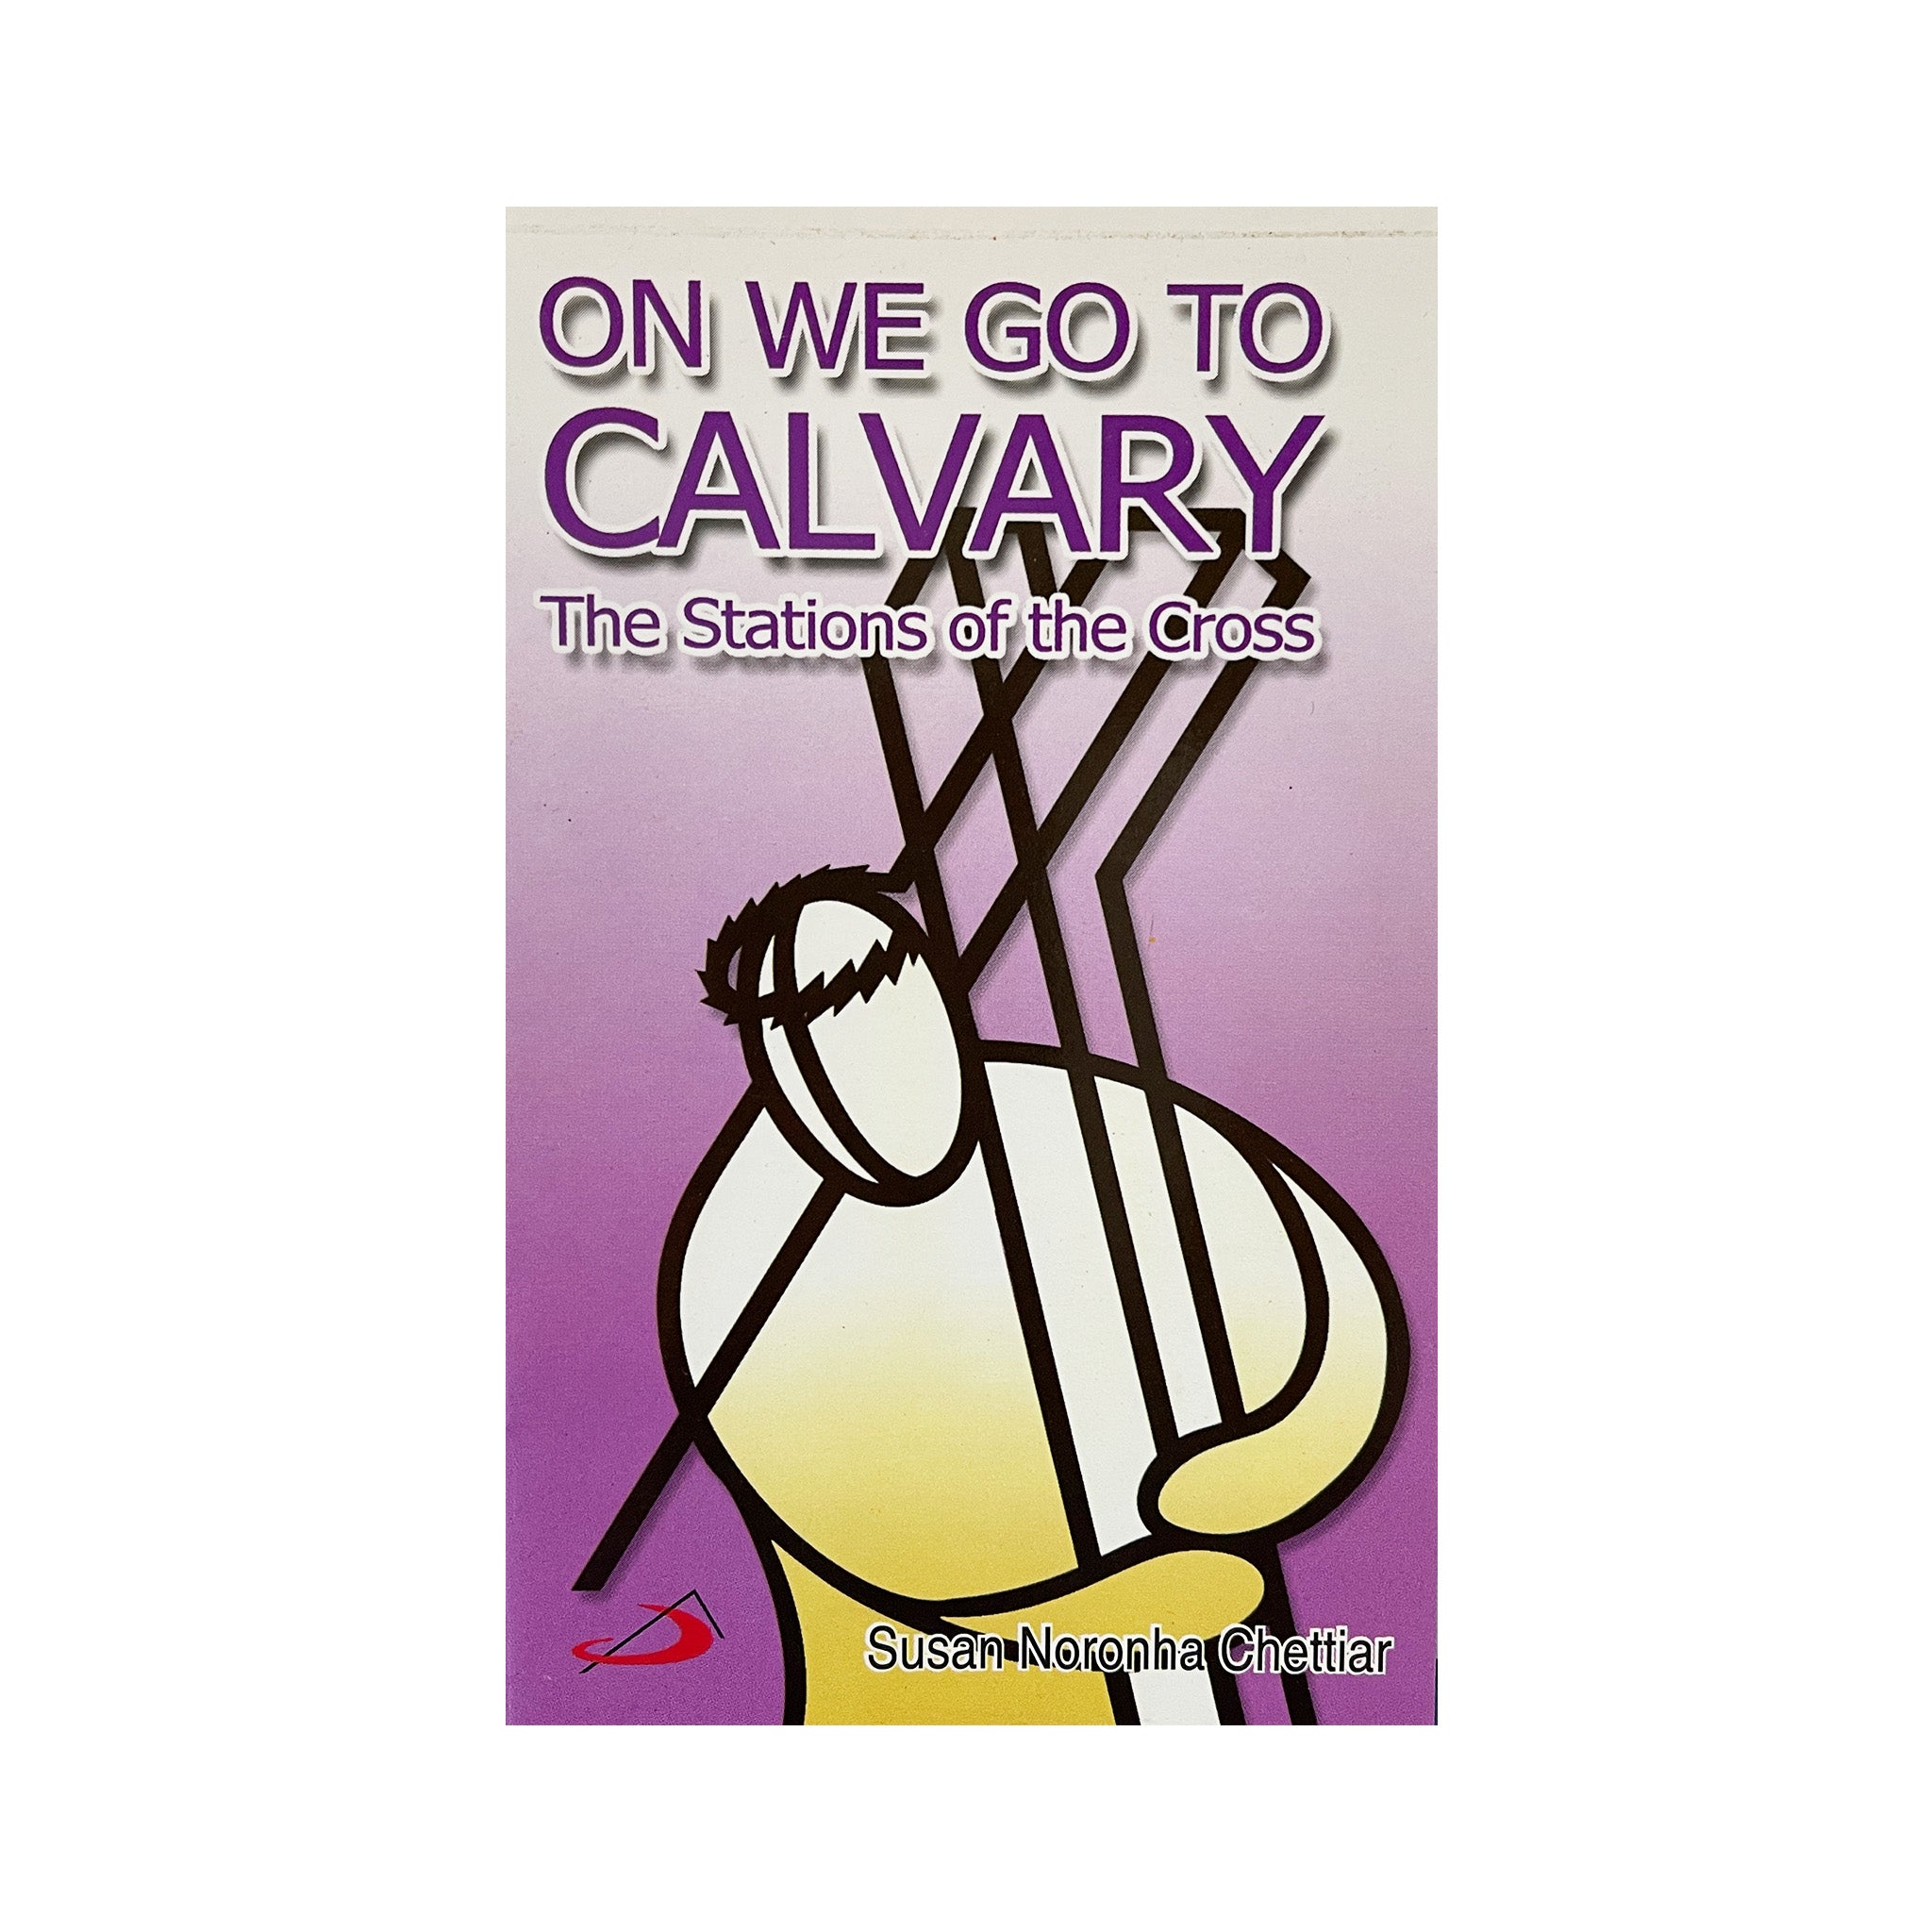 ON WE GO TO CALVARY - The Stations of the Cross